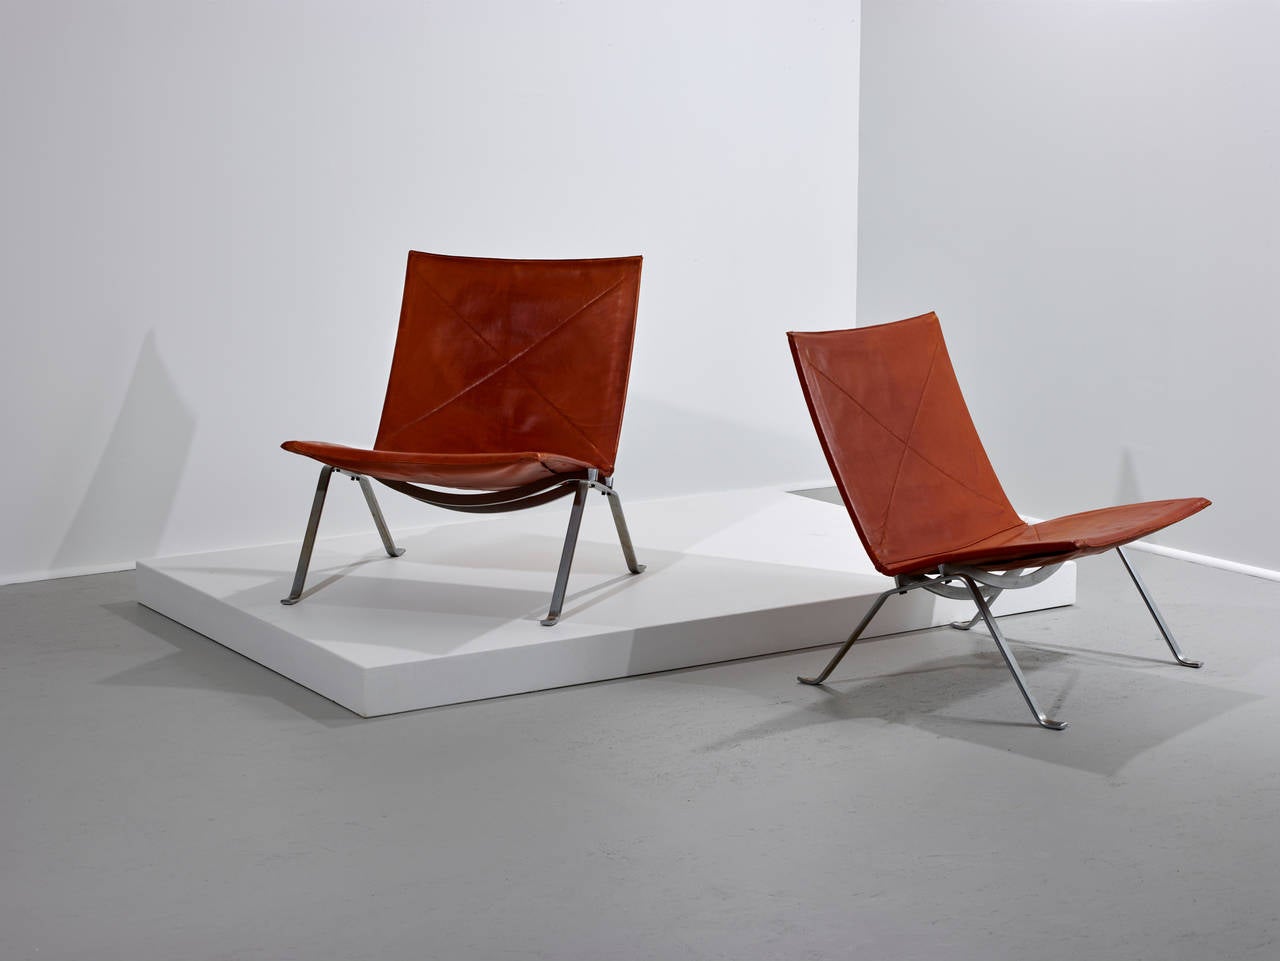 Poul Kjaerholm, PK 22 lounge chairs.

E. Kold Christensen.
Denmark, 1956.

Leather, chrome-plated steel.
Measures: 24.75 W x 27 D x 27 H inches.

Signed with manufacturer's mark to each chair, original leather.